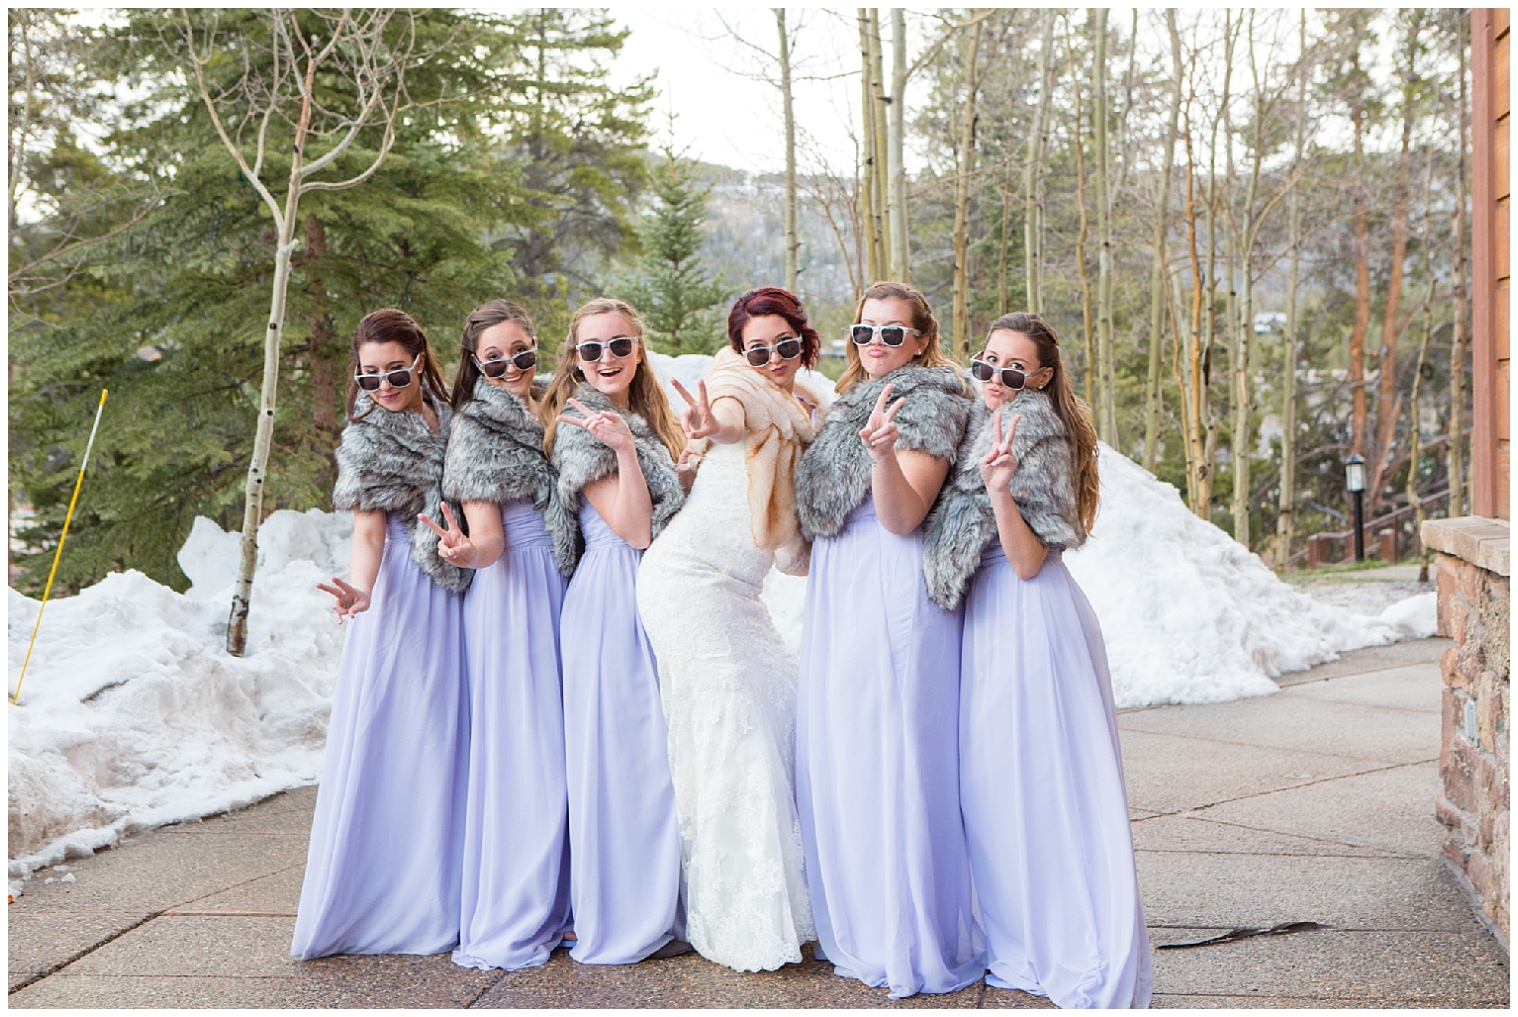 Fun portrait of the bride with her bridesmaids at a winter wedding at Sevens.